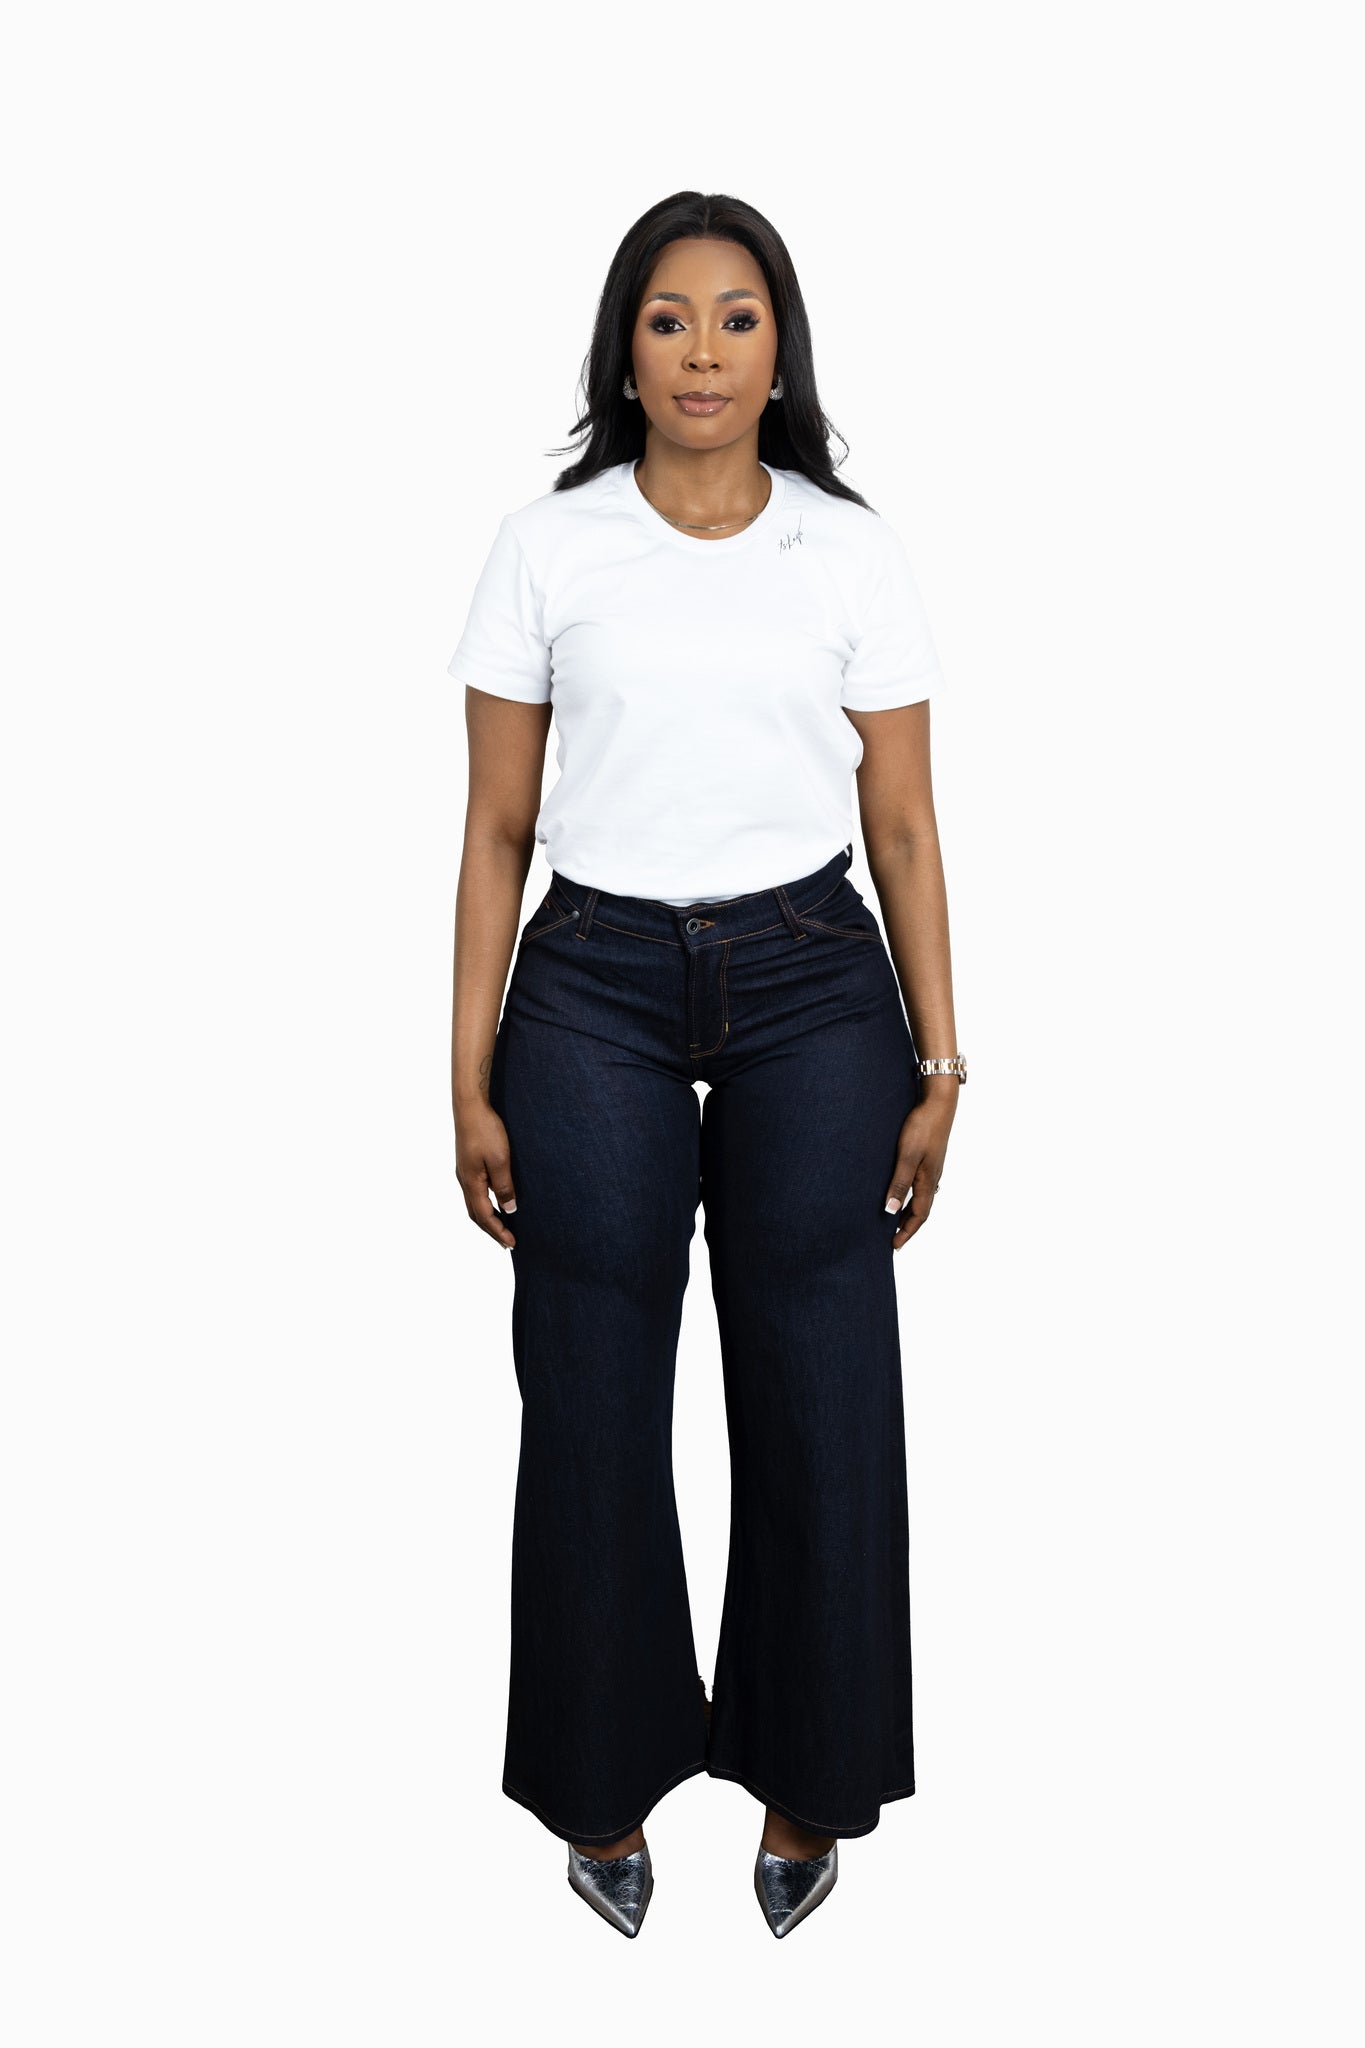 A FRONT IMAGE OF A MODEL WEARING THE RAW TSHEPO PAKISHA JEANS